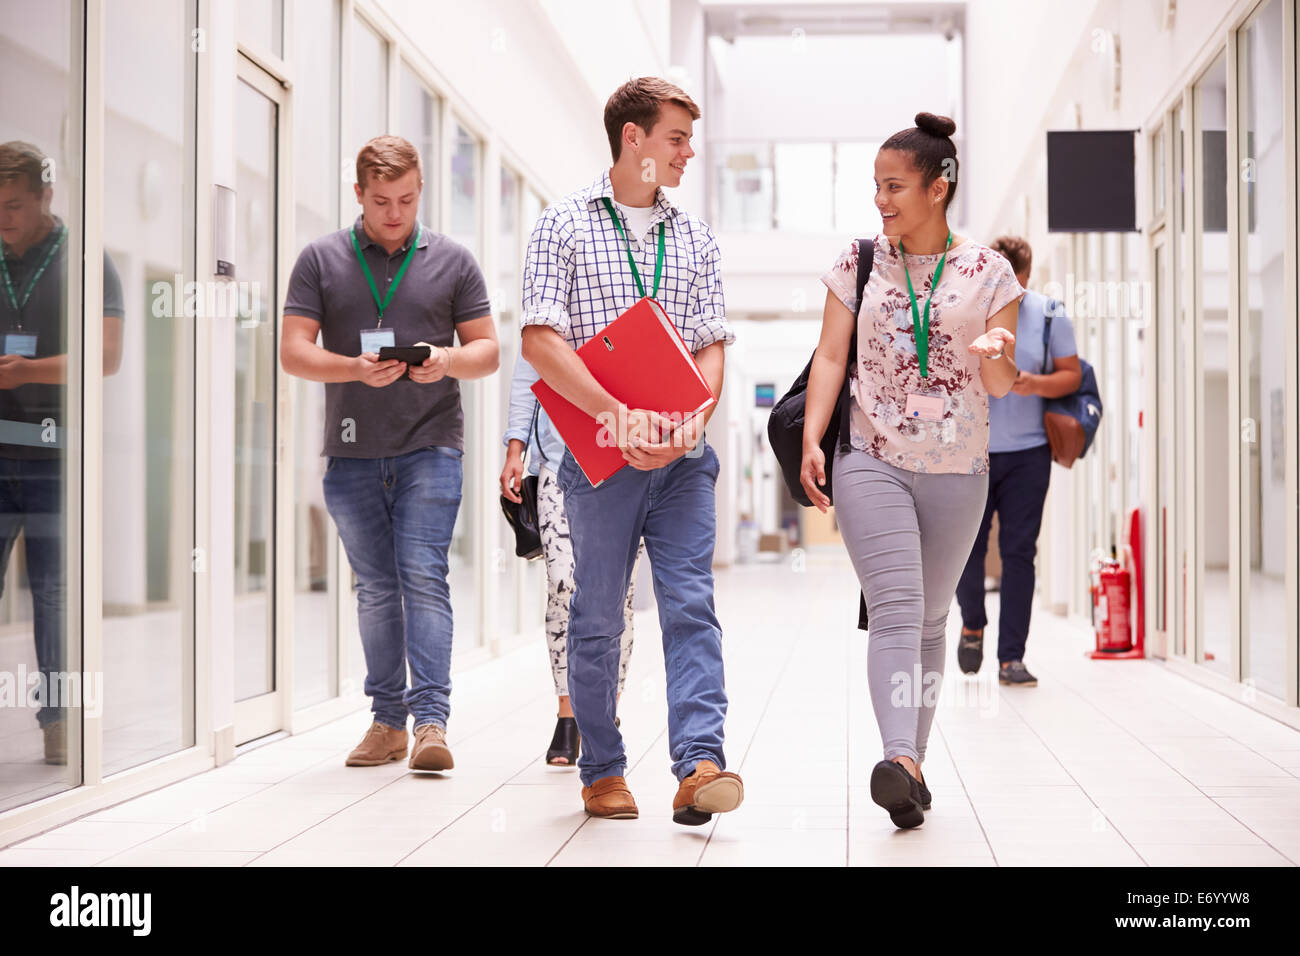 Group Of College Students Walking Along Corridor Stock Photo